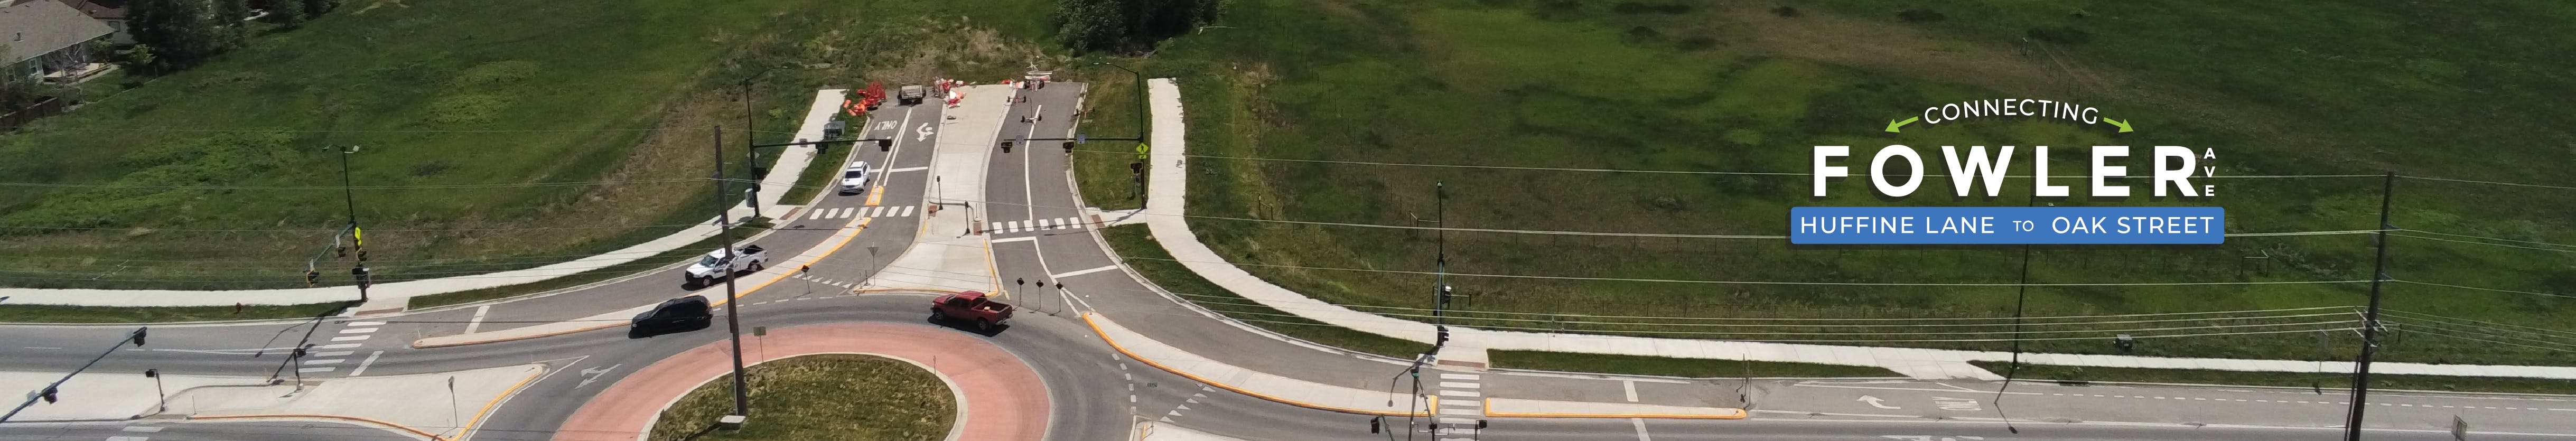 Roundabout with cars on it shows the missing connection where Fowler avenue would connect